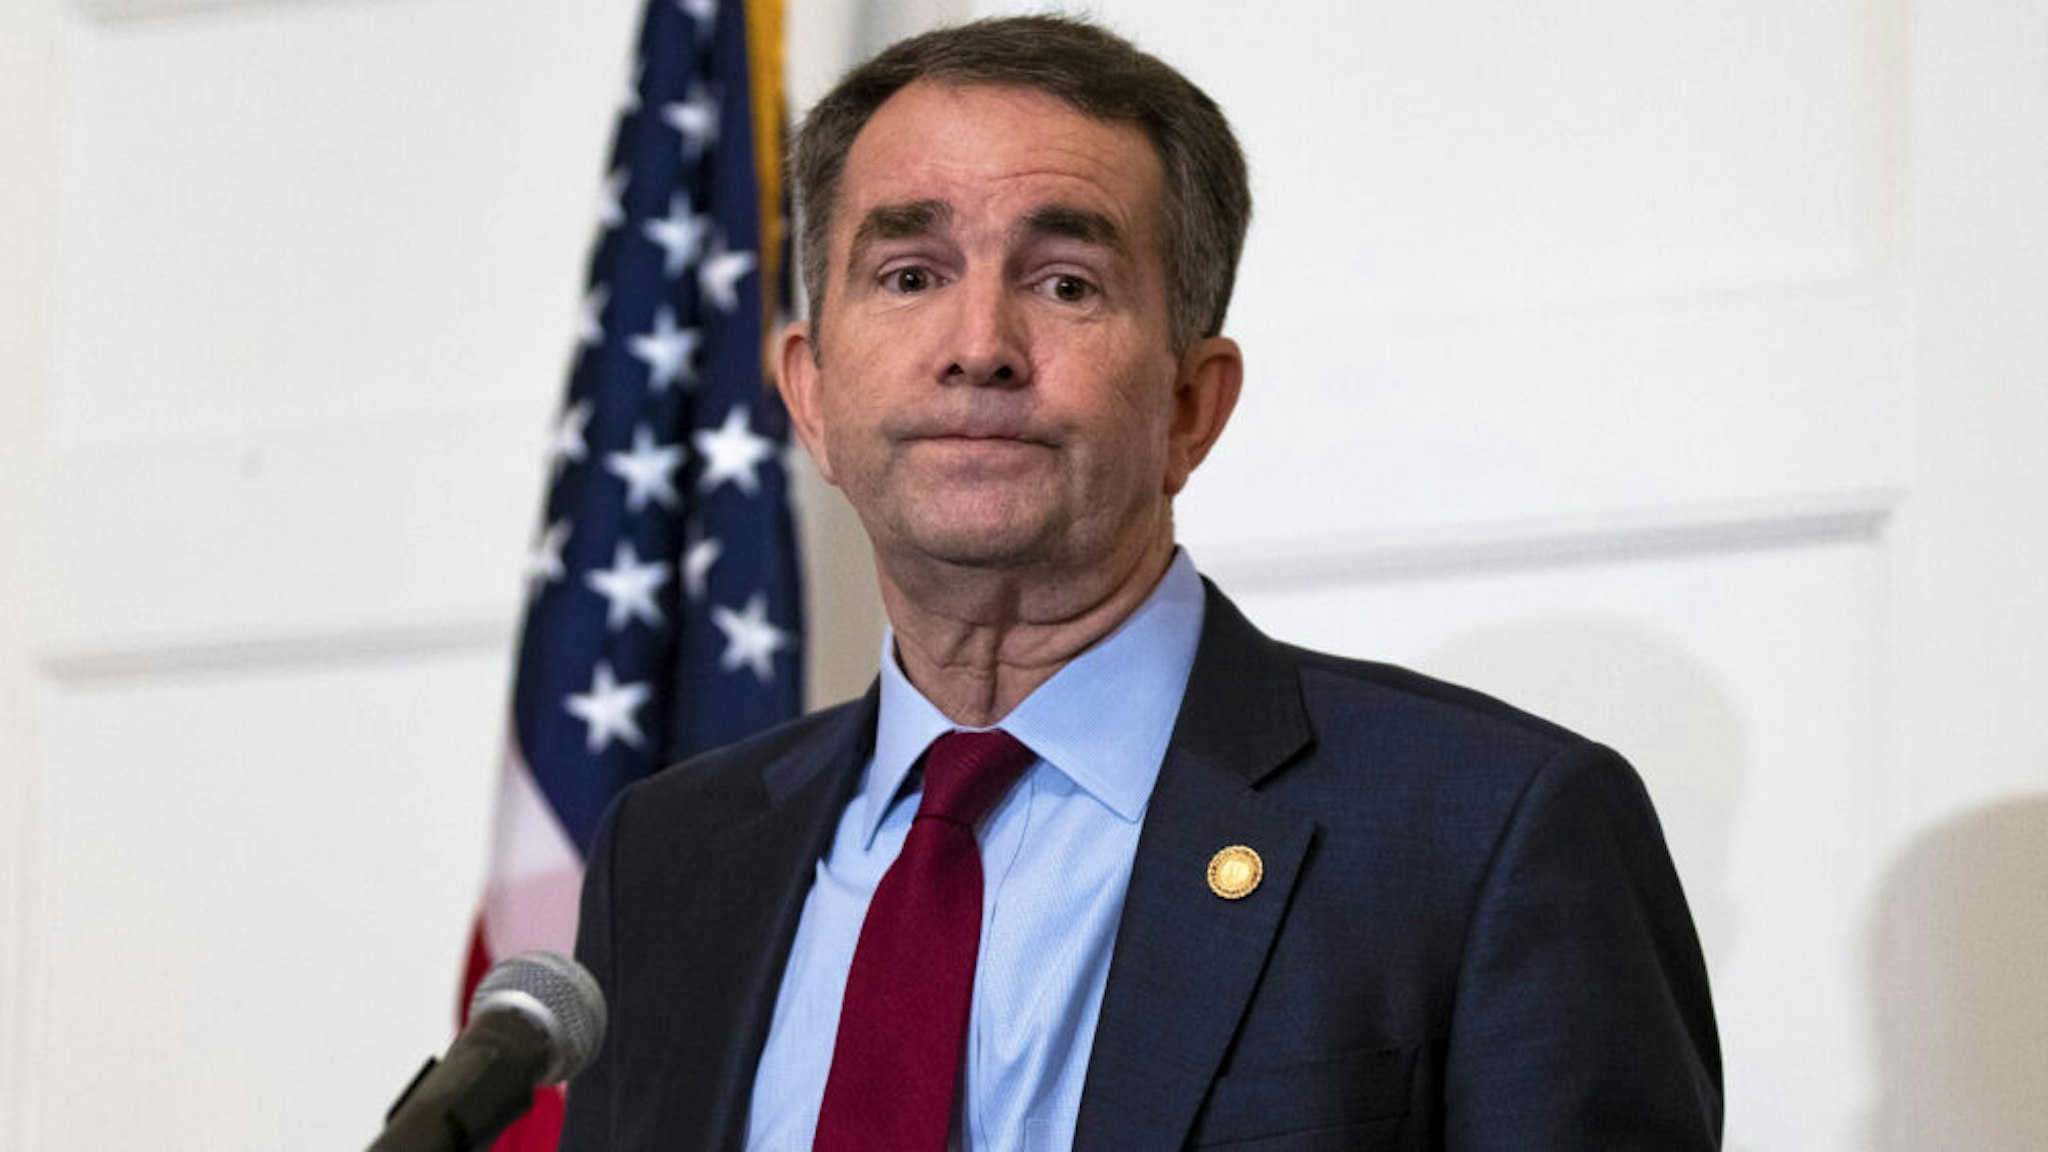 Virginia Governor Ralph Northam speaks with reporters at a press conference at the Governor's mansion on February 2, 2019 in Richmond, Virginia. Northam denies allegations that he is pictured in a yearbook photo wearing racist attire.